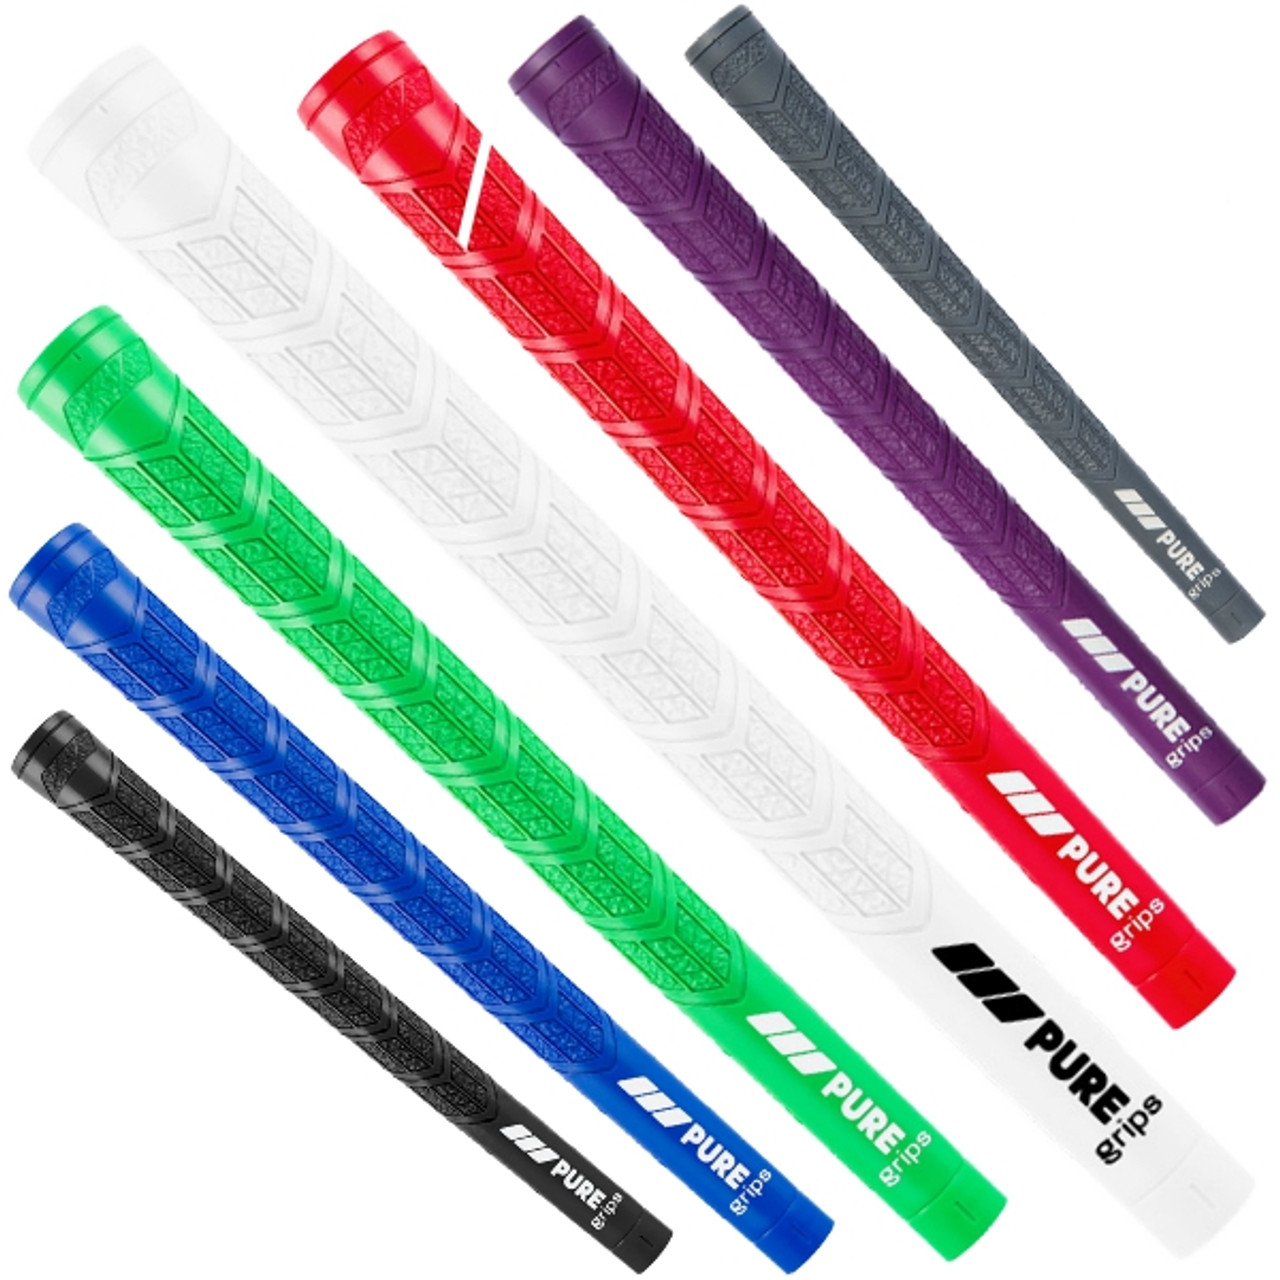 New Soft Compound - Pure Grips DTX Standard Grips - NEON Yellow x